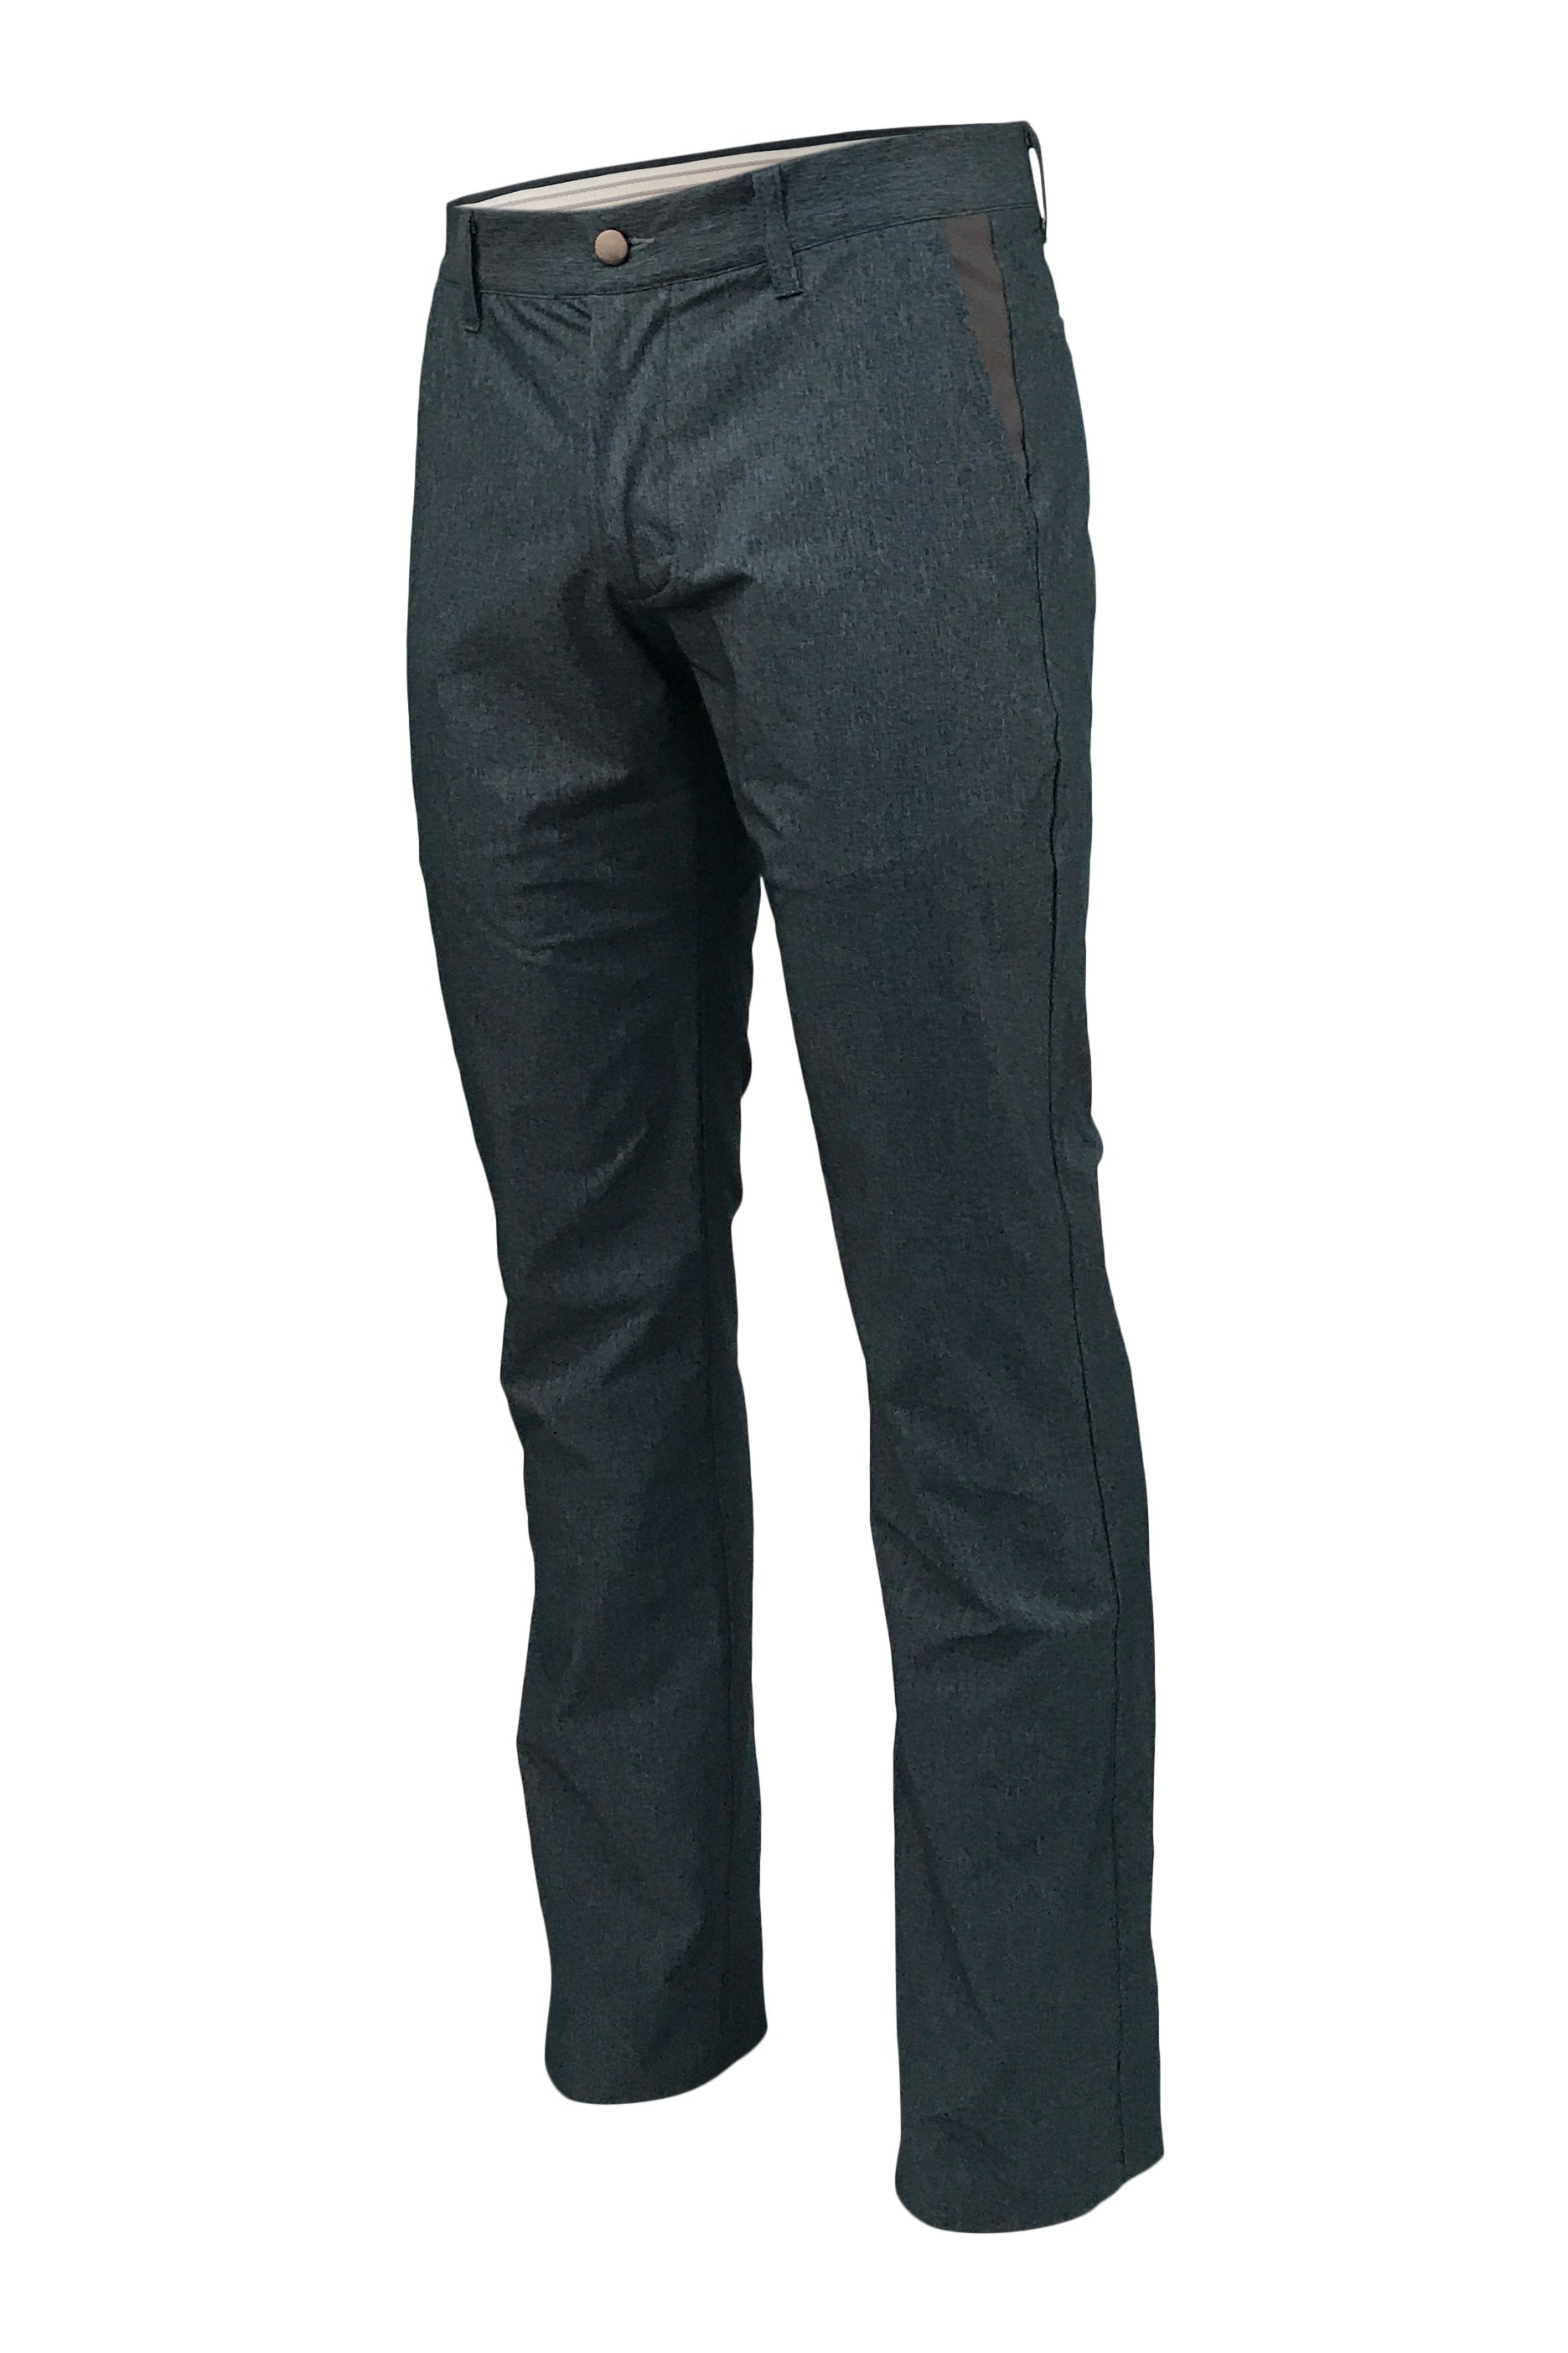 CLUBHOUSE PANTS - TWILIGHT – STATE APPAREL